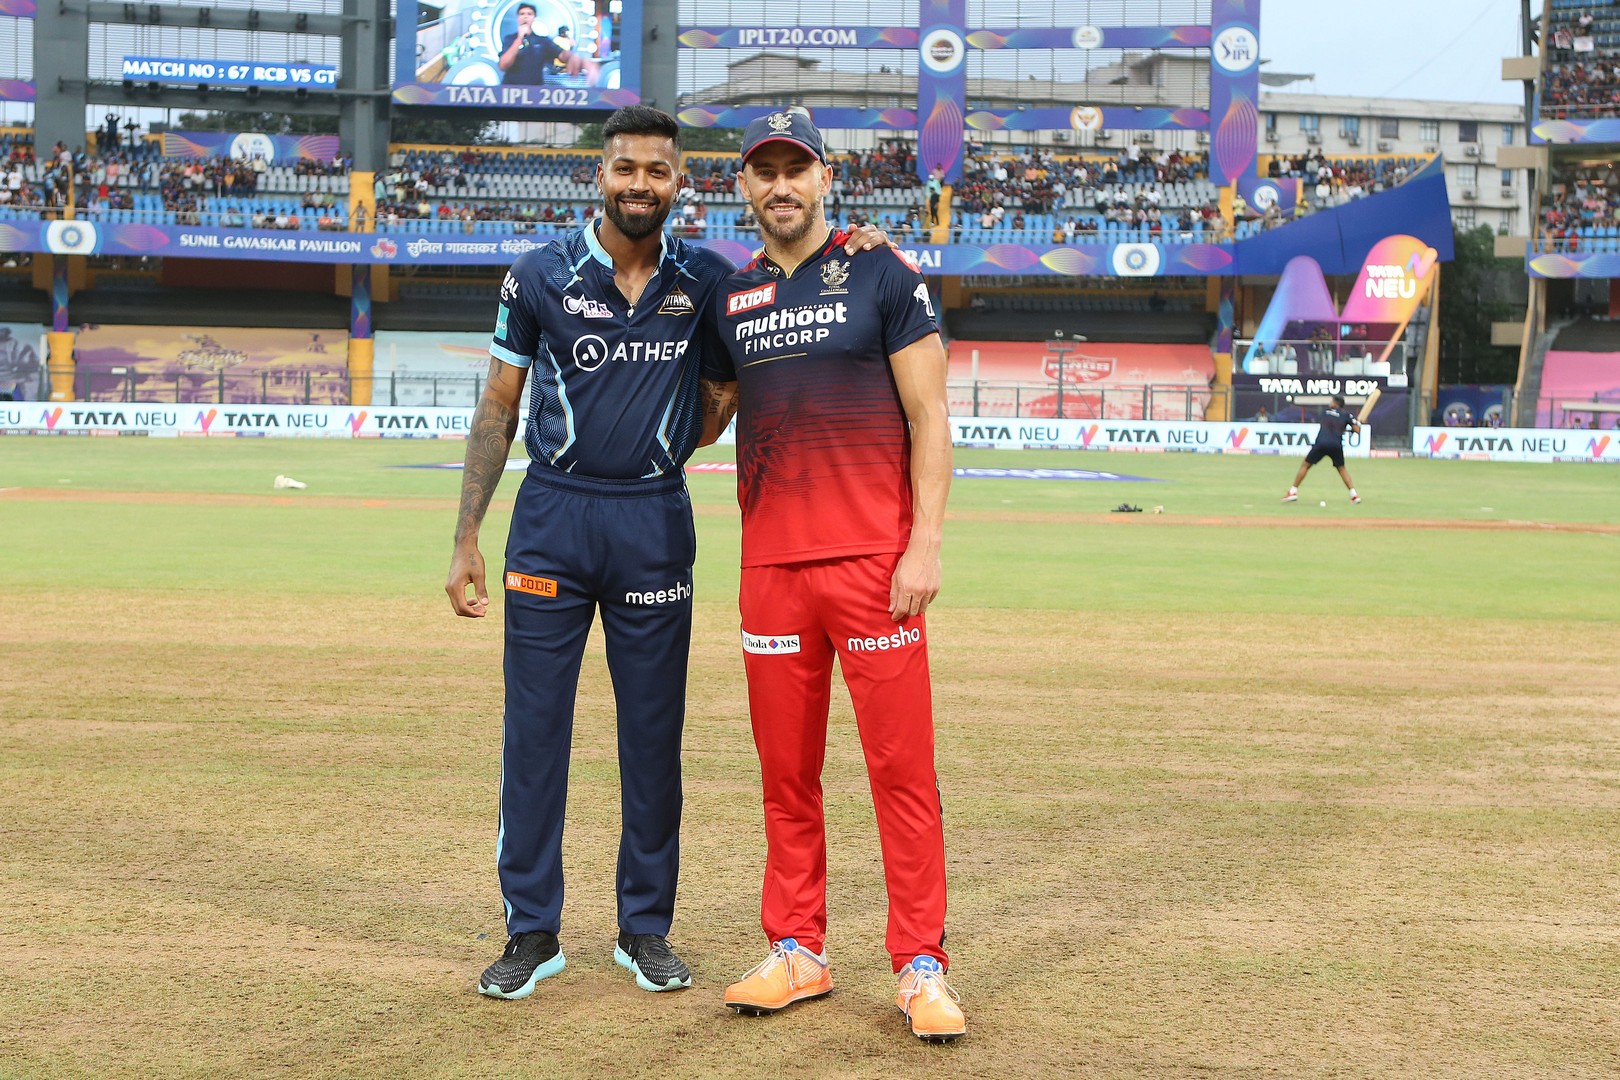 RCB VS GT, 19TH MAY, 2022, GAME 14 - 46